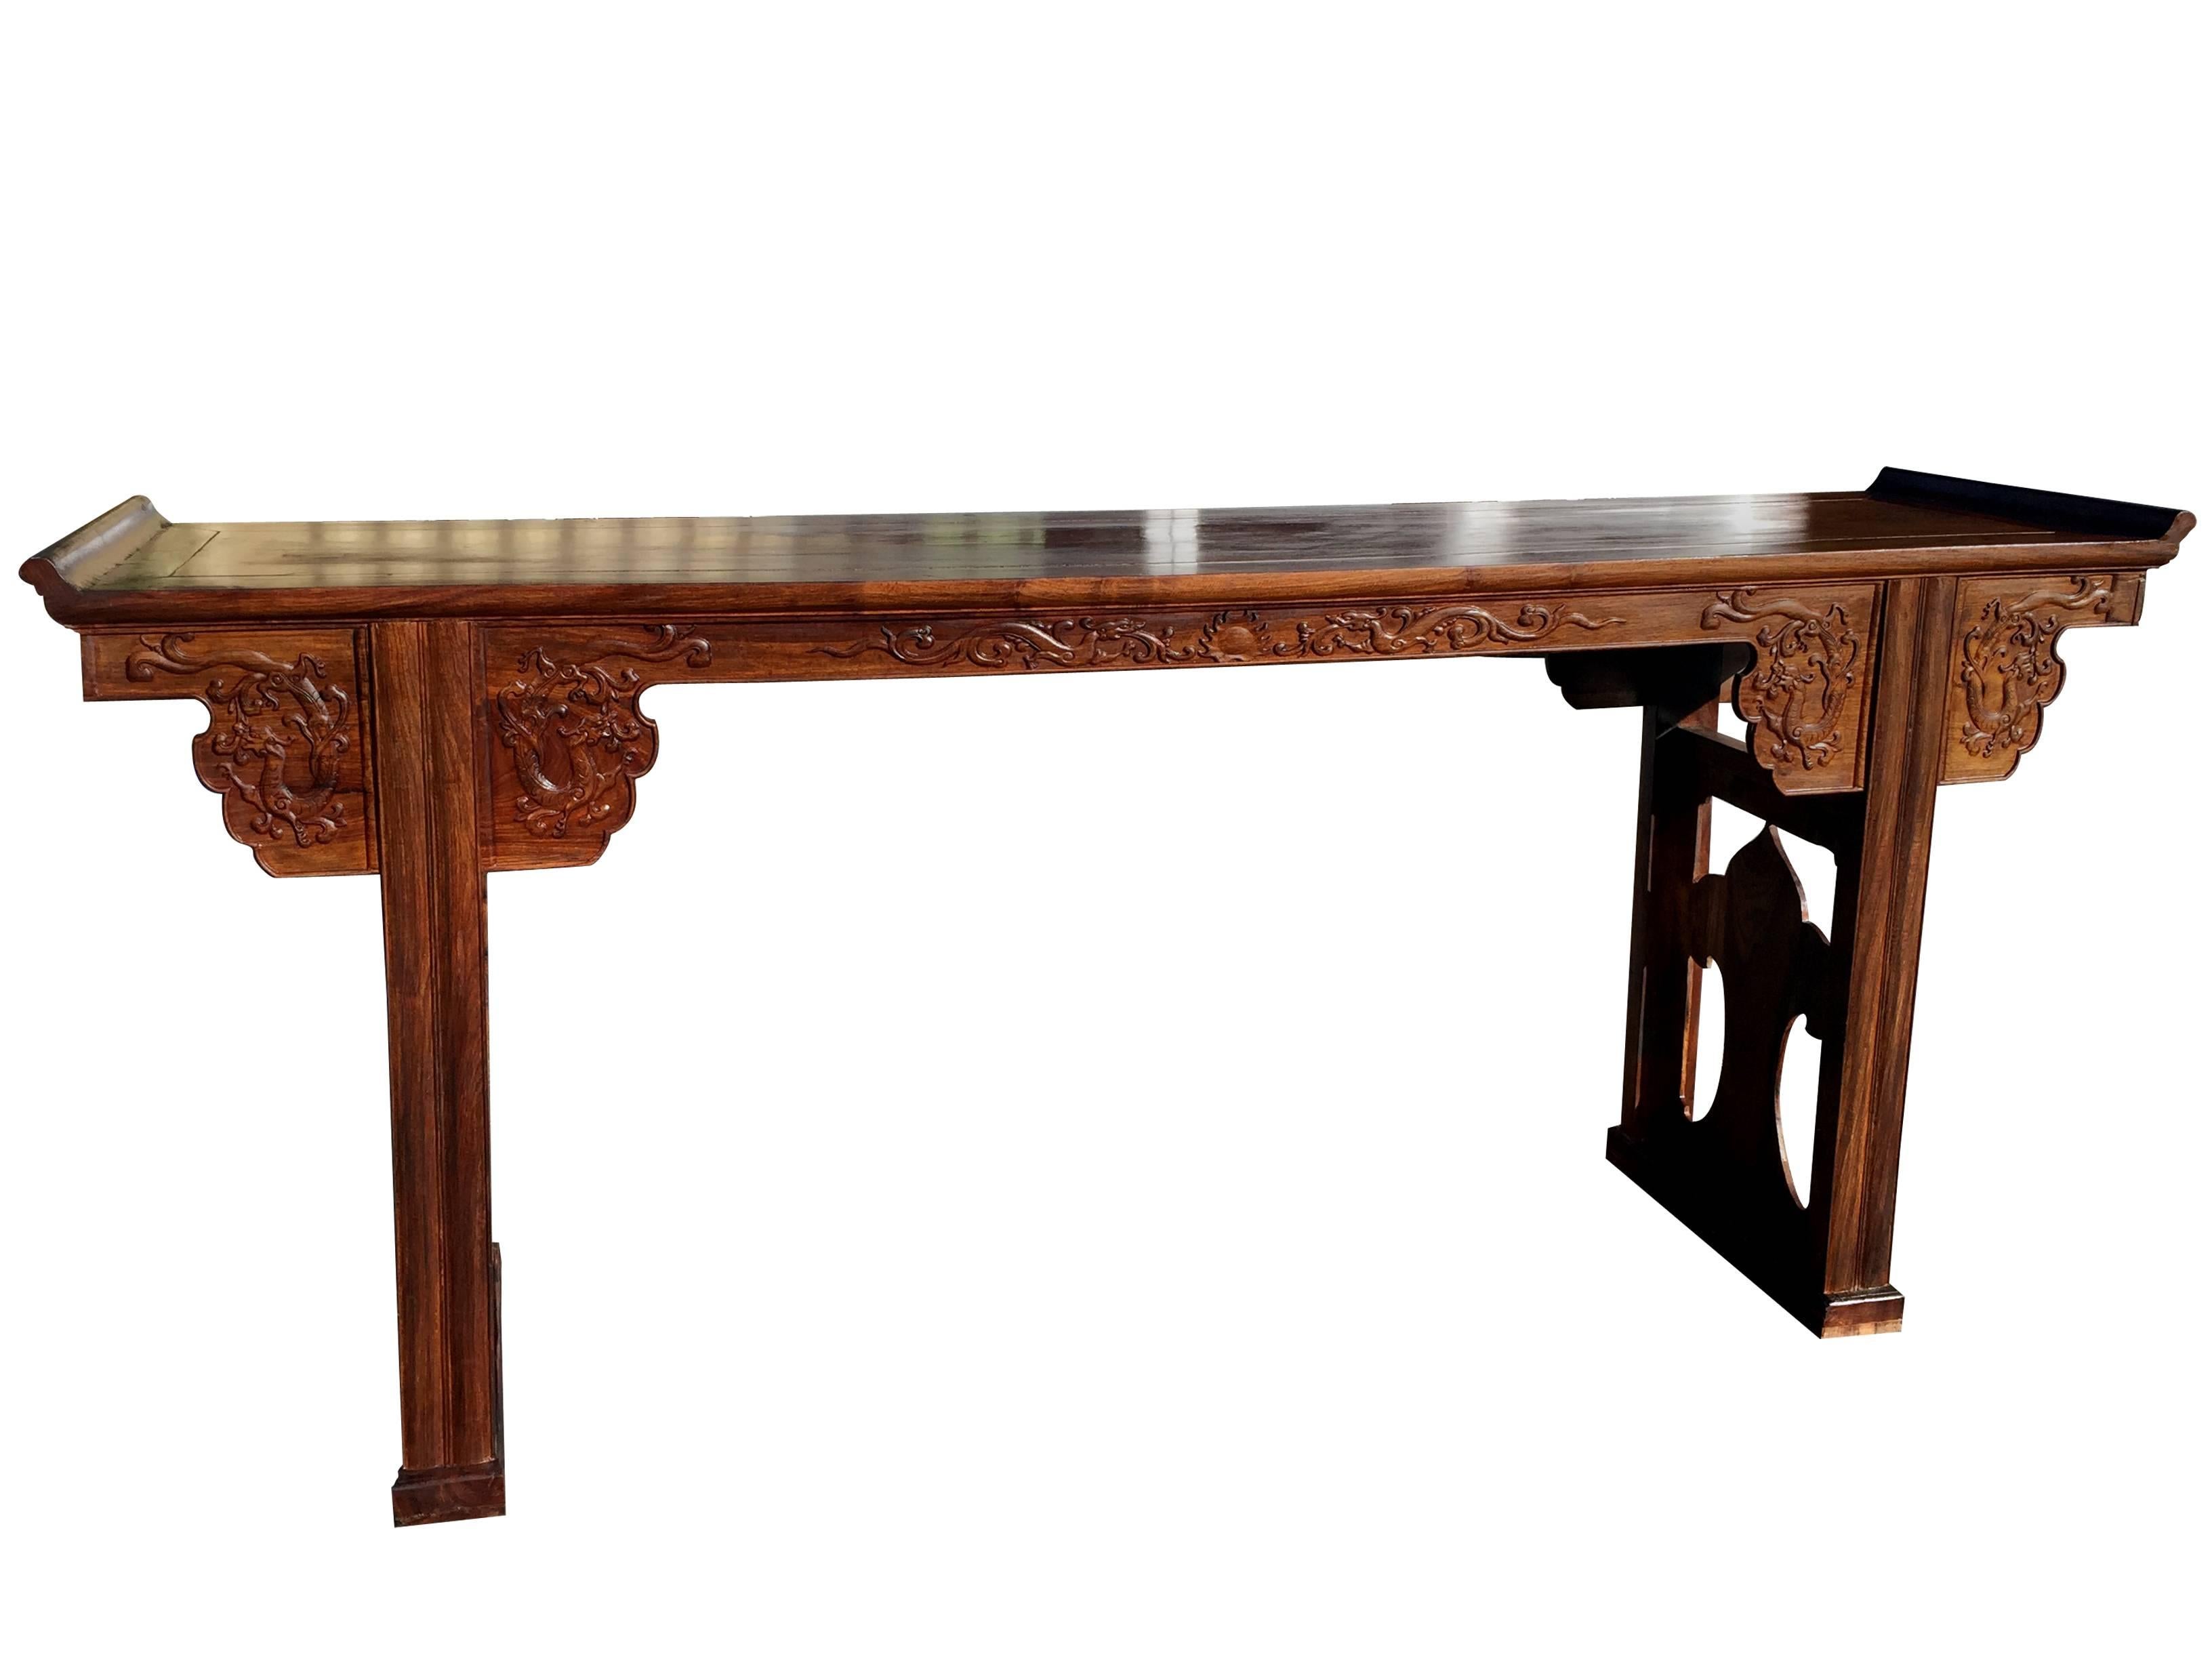 We proudly offer this fine Haunghauli wood altar table. This fine Chinese huanghuali wood altar table is accented with upturned sides. The table is ornamented with carved details of scrolling chilong in relief and boasts cutouts to the two side